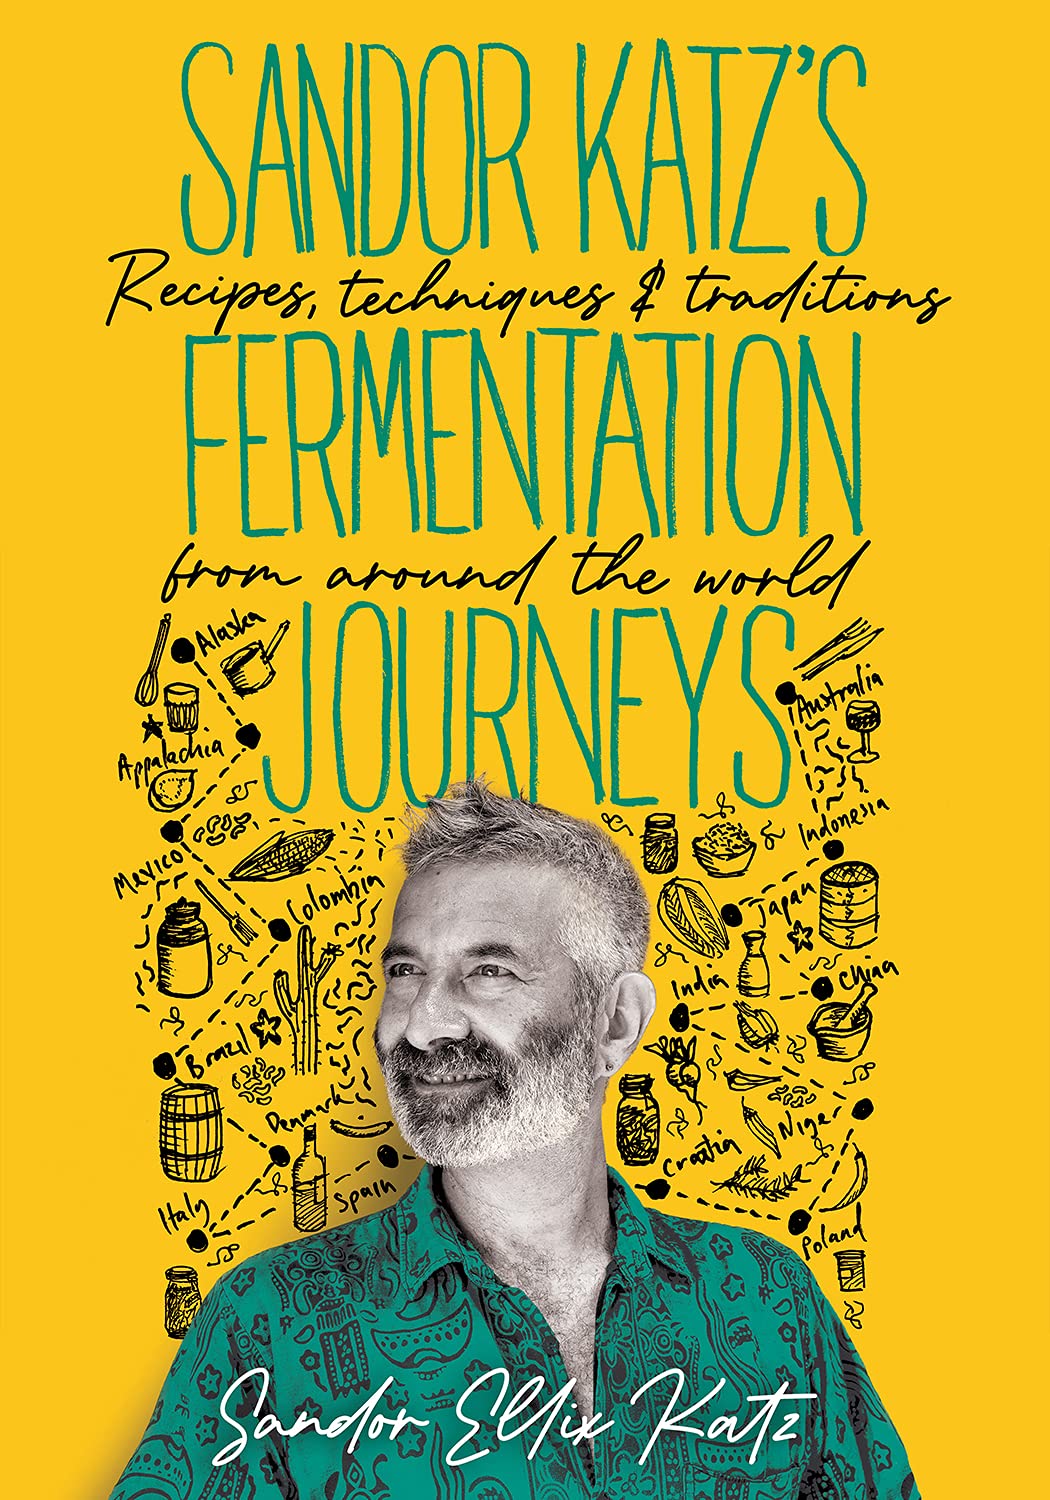 Fermentation Journeys: Recipes, Techniques, and Traditions from Around the World (Sandor Katz) *Signed*